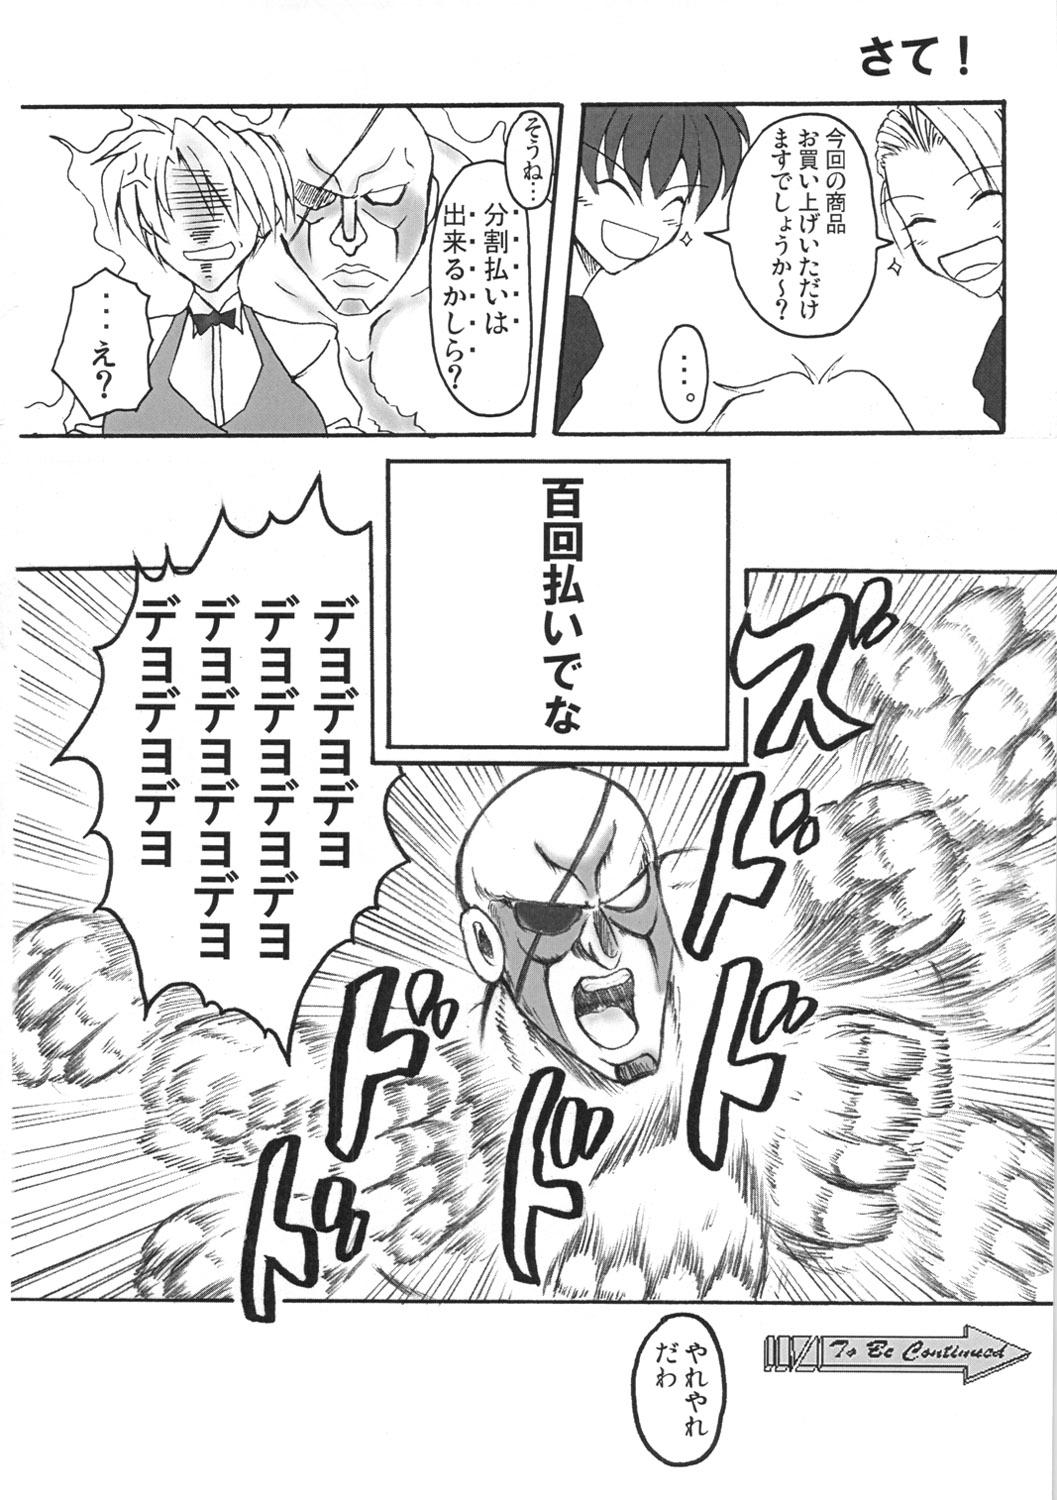 Hindi Diabolical - King of fighters Transvestite - Page 11